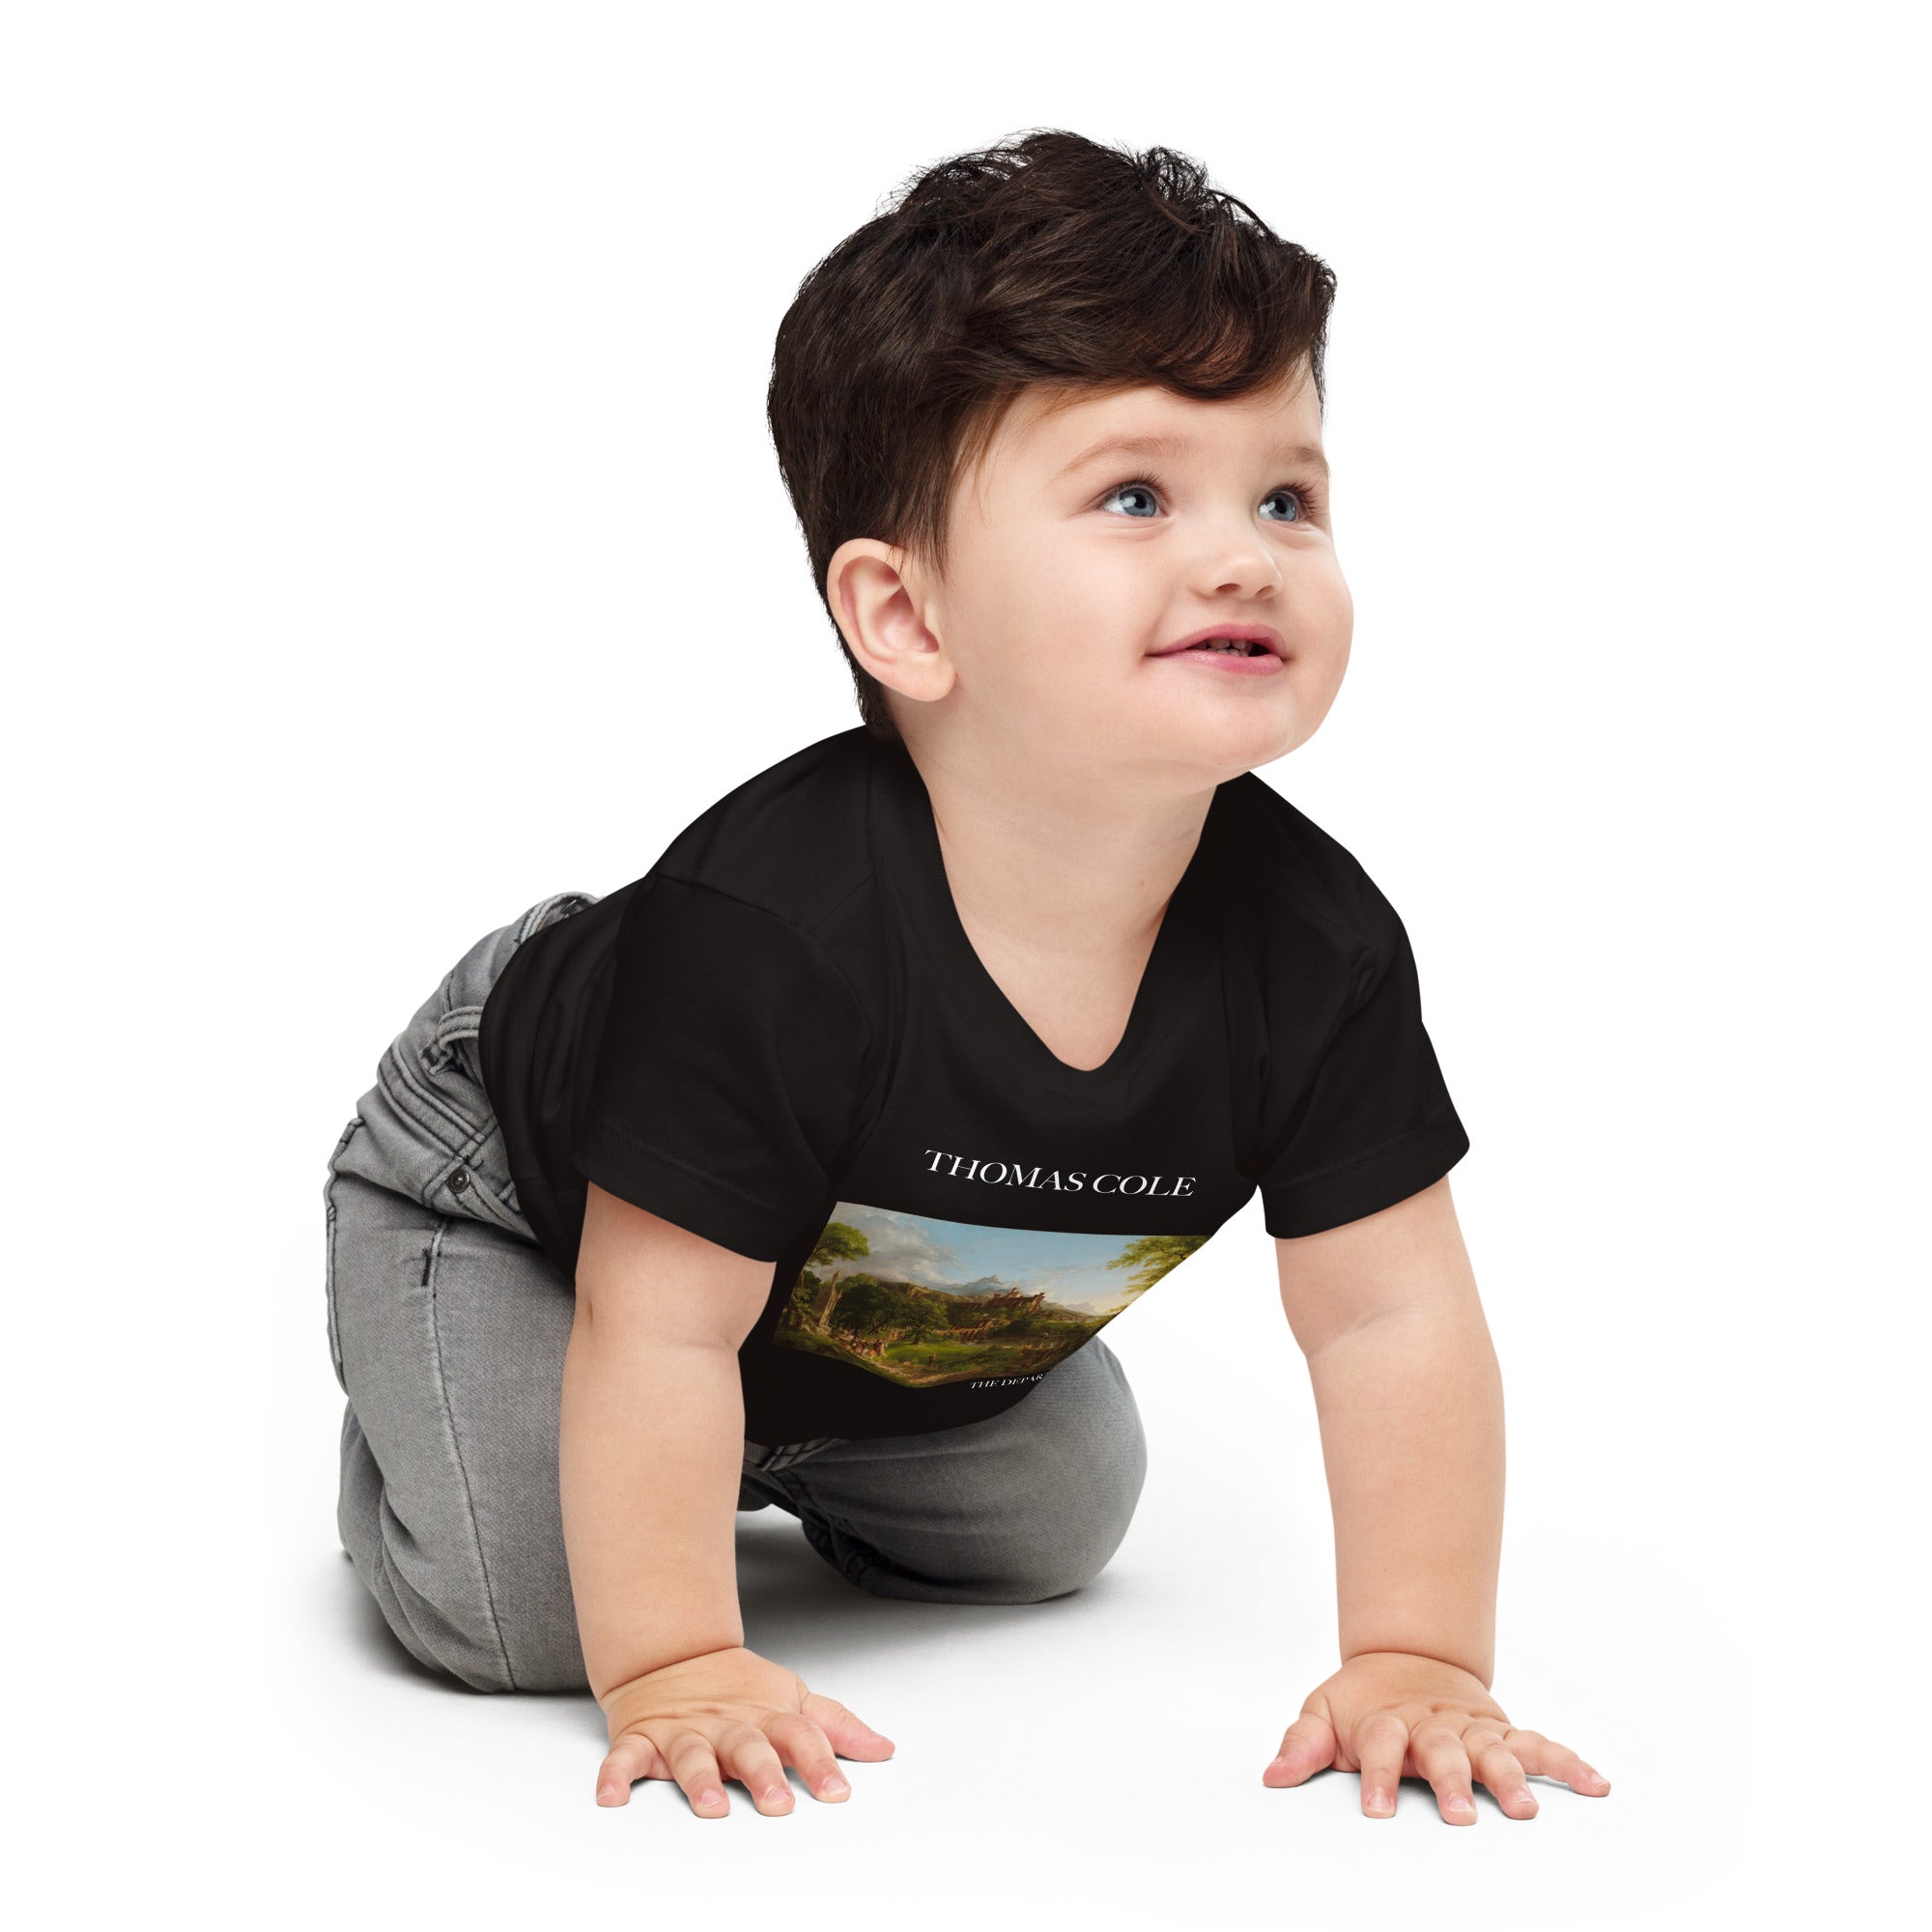 Thomas Cole 'The Departure' Famous Painting Baby Staple T-Shirt | Premium Baby Art Tee